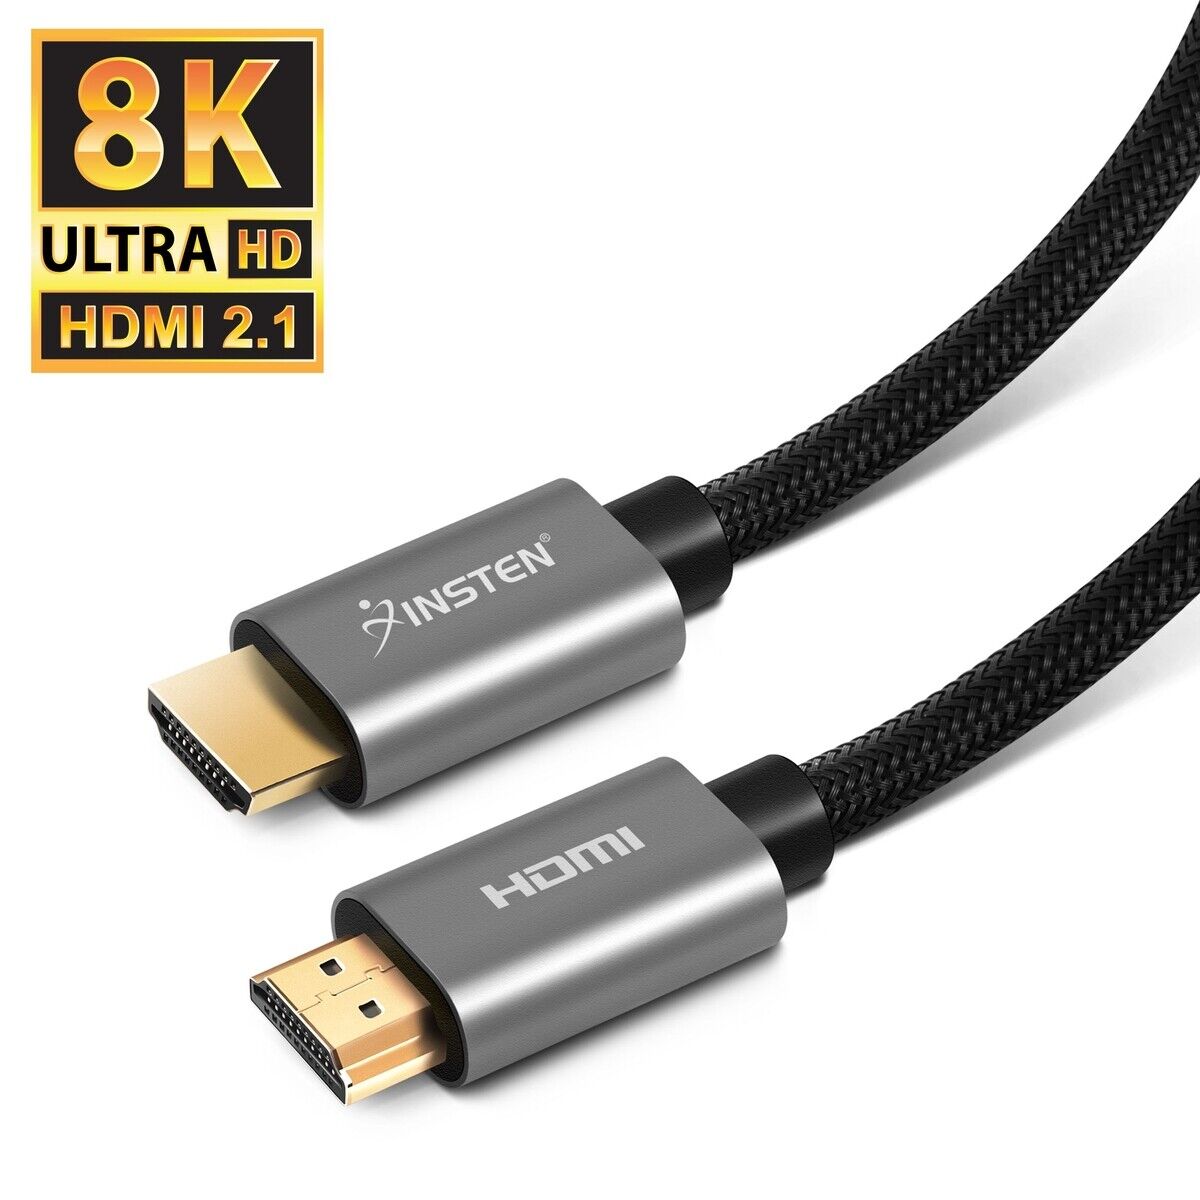 15 Feet HDMI Male to Male Cable 2.1, 8K 60Hz, 48Gbps, Gold Connectors, Black